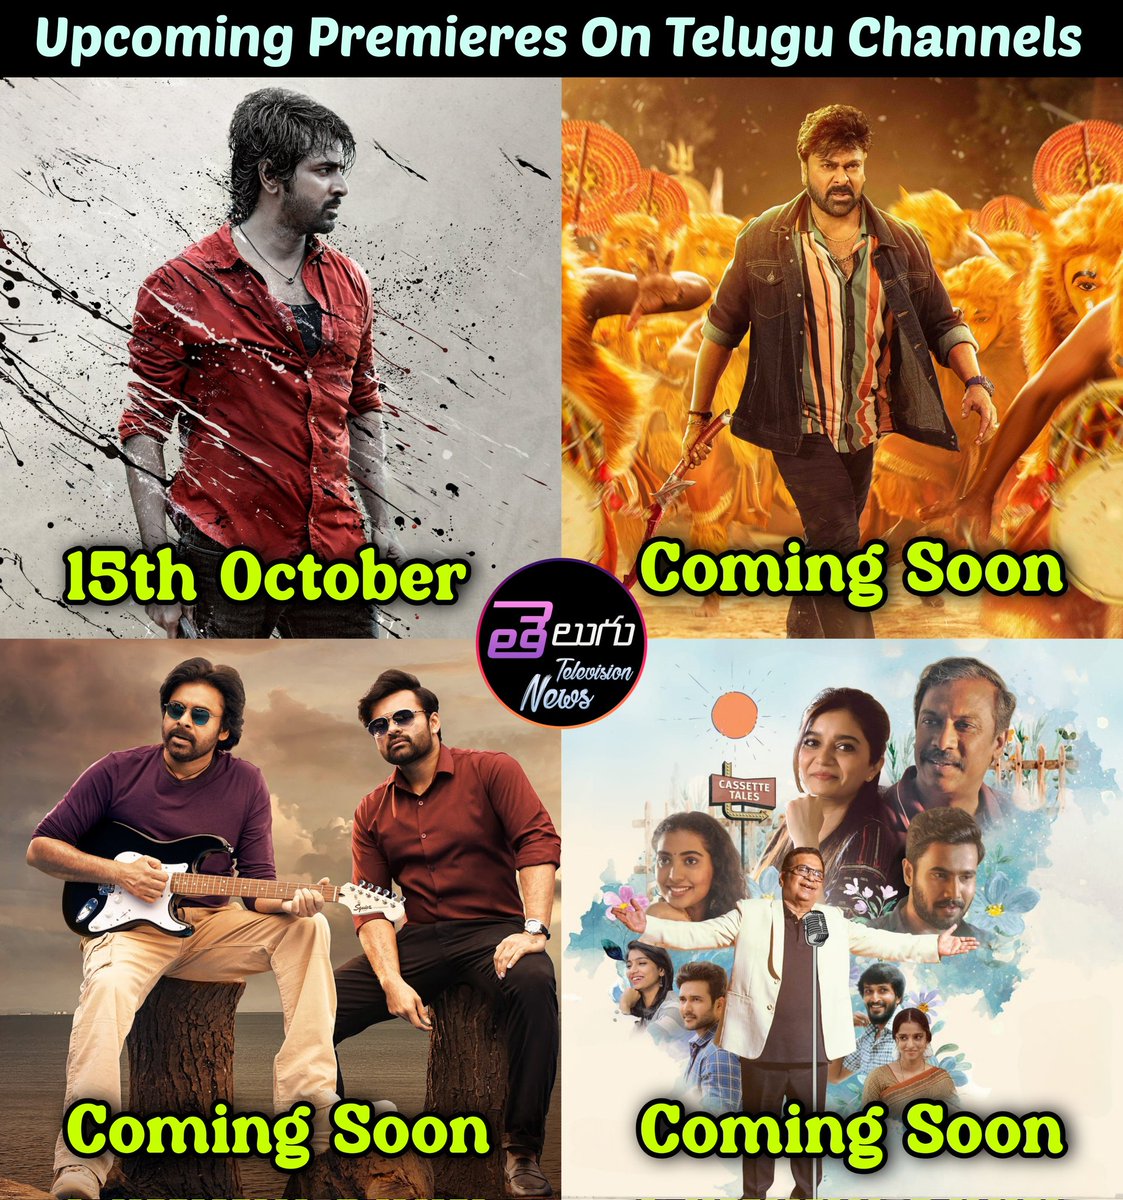 Upcoming Premiere Movies On Telugu Channels 

#Mahaveerudu 
15th October at 6pm on #GeminiTV 

Coming Soon Movies 
#WaltairVeerayya 
#BroTheAvathar 
#Panchathantram 

Note:- #starmaa Still Not Announced Any Premiere Movies.. Stay Tuned With Us For The update